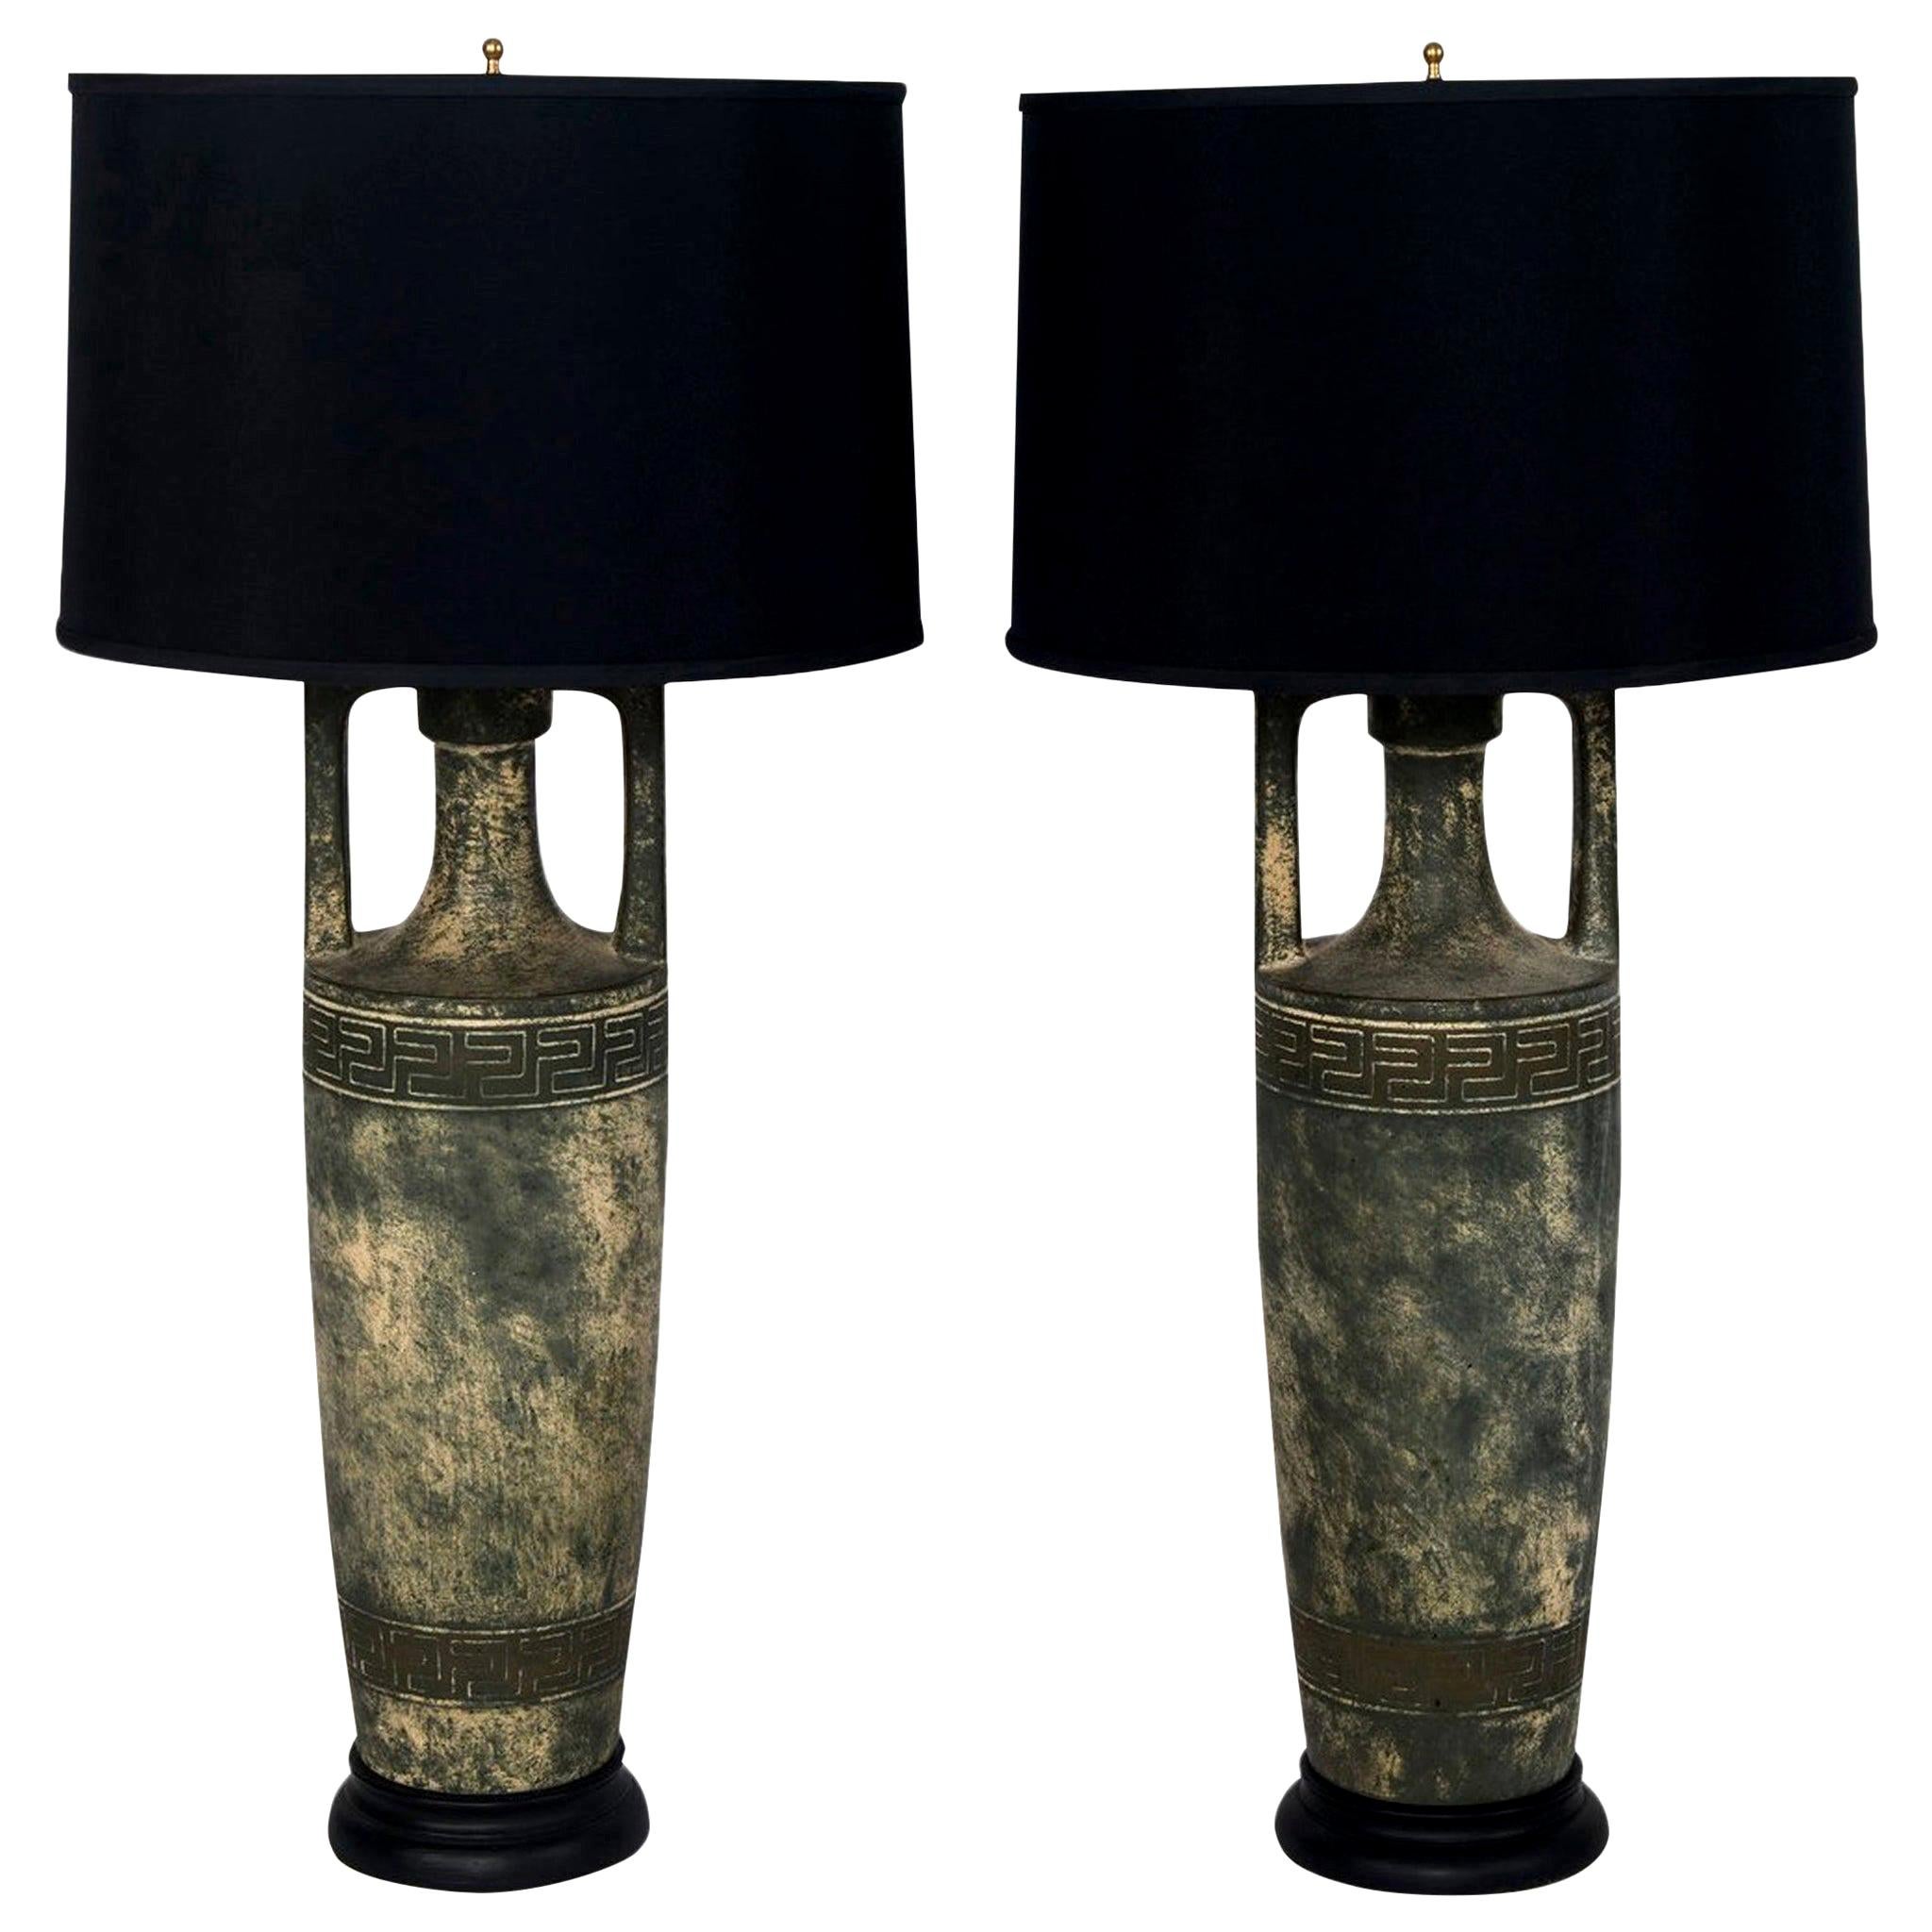 Pair of Greek Key Lamps with Black Shades